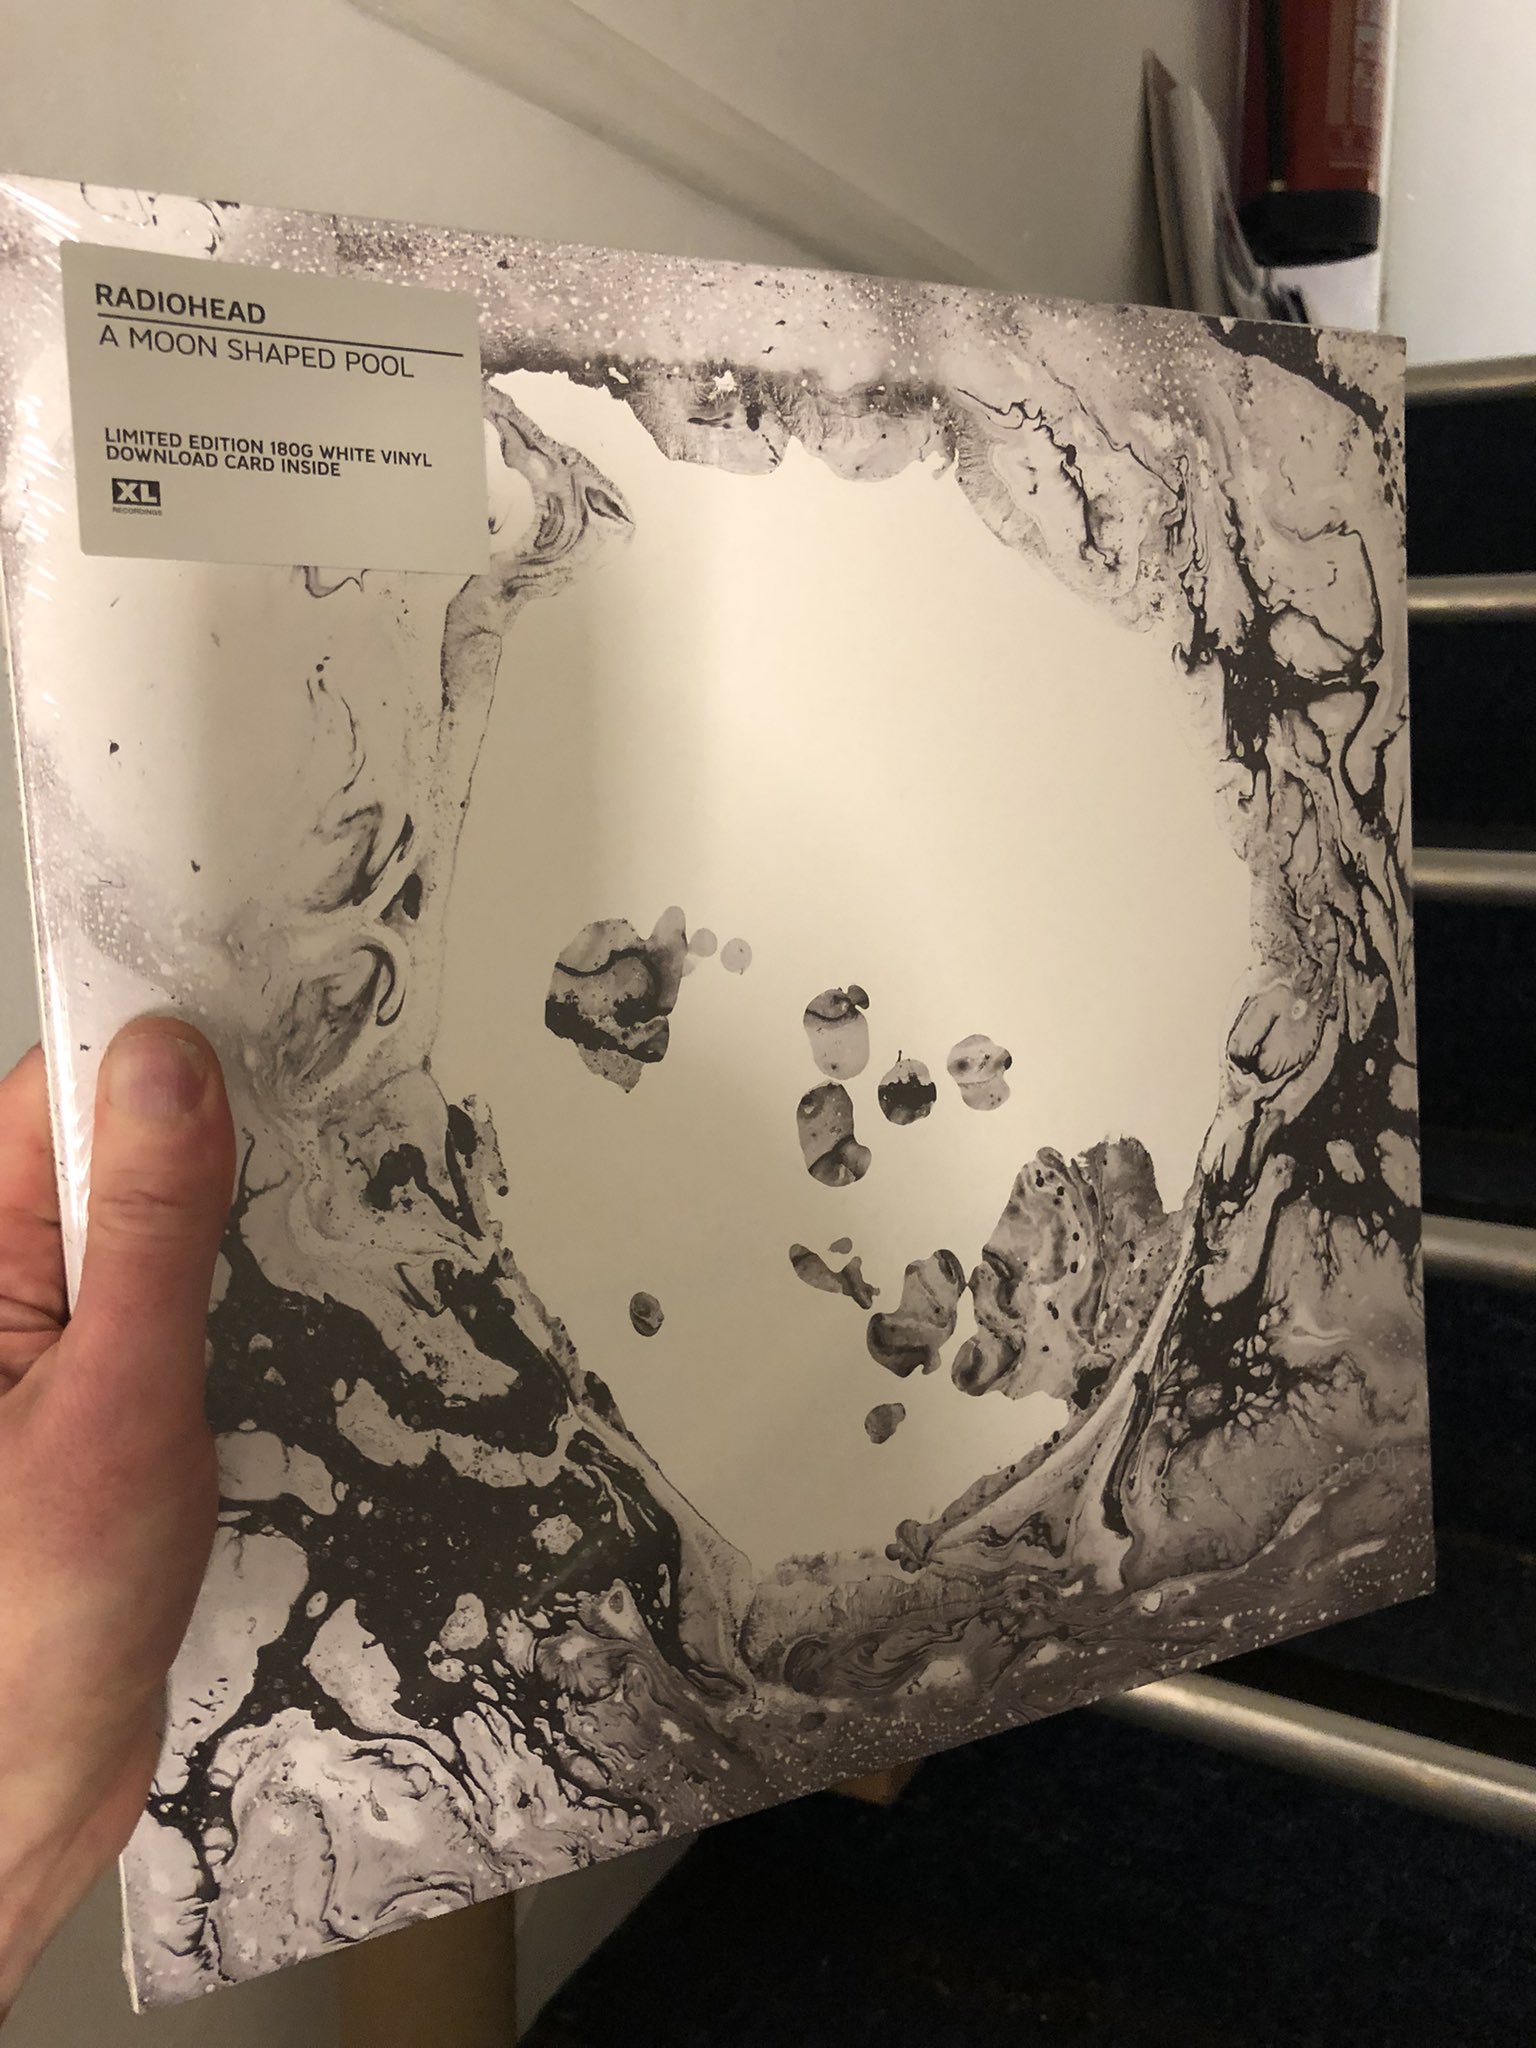 Mediate Vedhæftet fil Skære af Lost In Vinyl on Twitter: "Back in stock - look at this cheeky little  number…! 'A Moon Shaped Pool' by @radiohead on a limited white vinyl  repress. Available instore now and also👇